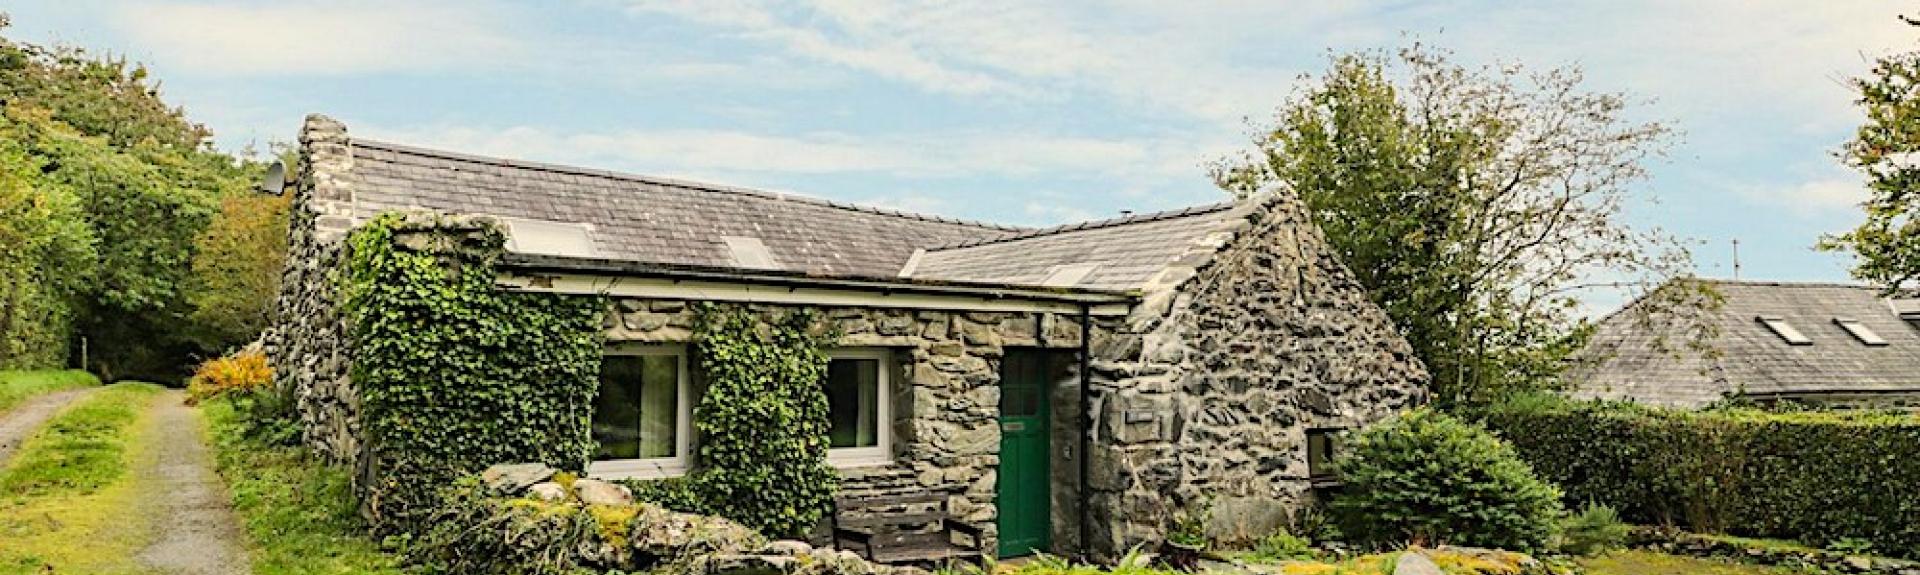 Nestling into a bend on a remote country lane this Gwynedd rural retreat is a single-storey barn conversion.torey barn conversion nestles into a bend in a country lane